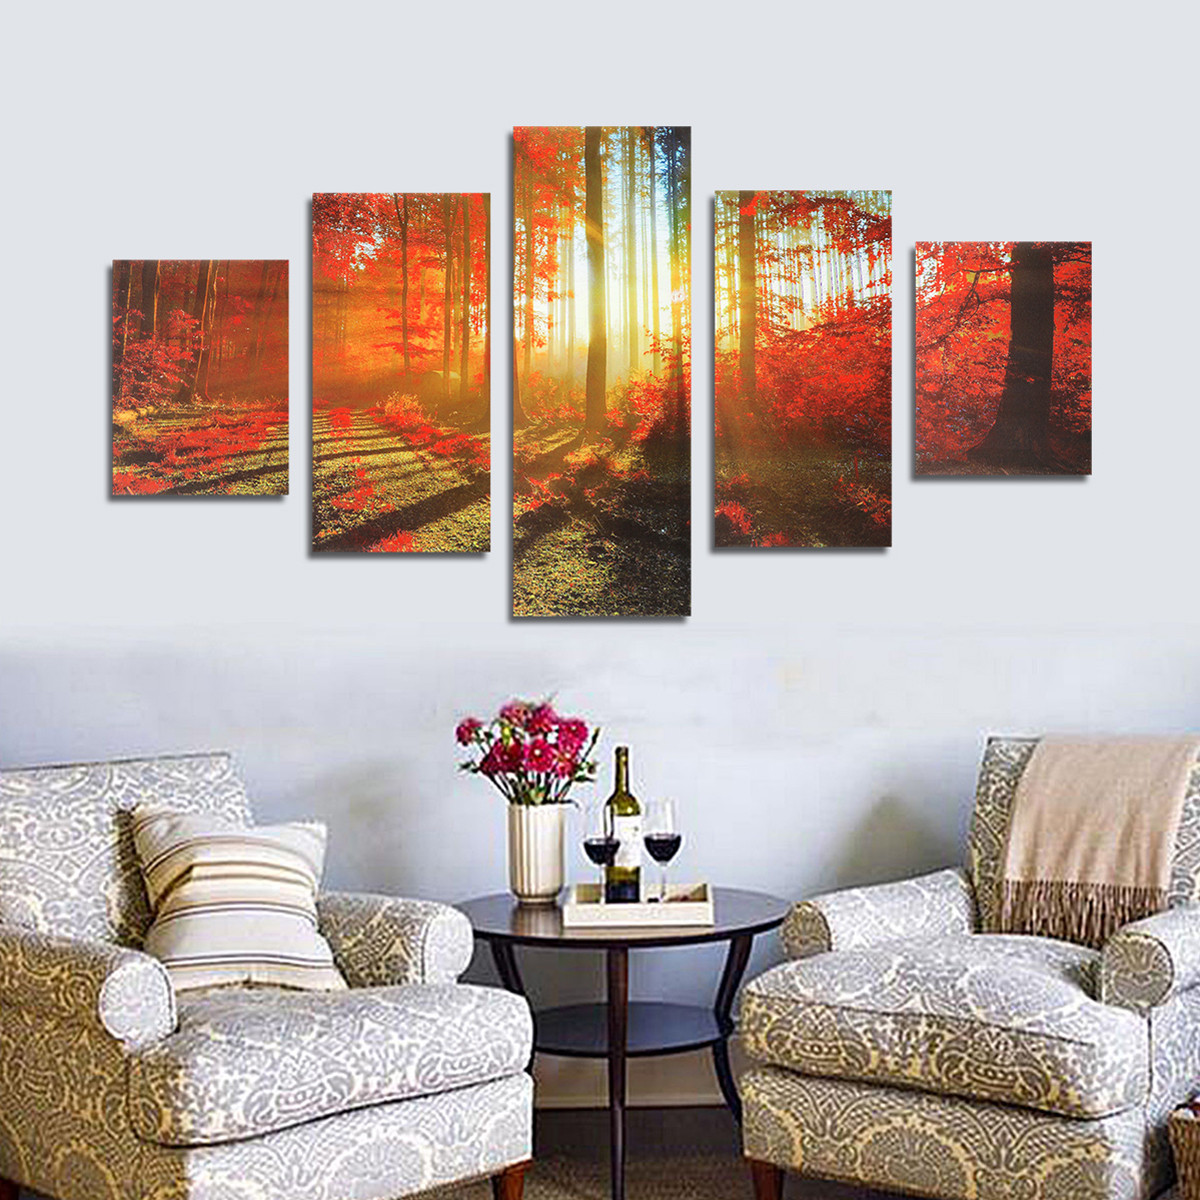 

Five Cascade Red Woods Sunshine Abstract Canvas Wall Painting Picture Home Decoration Unframed